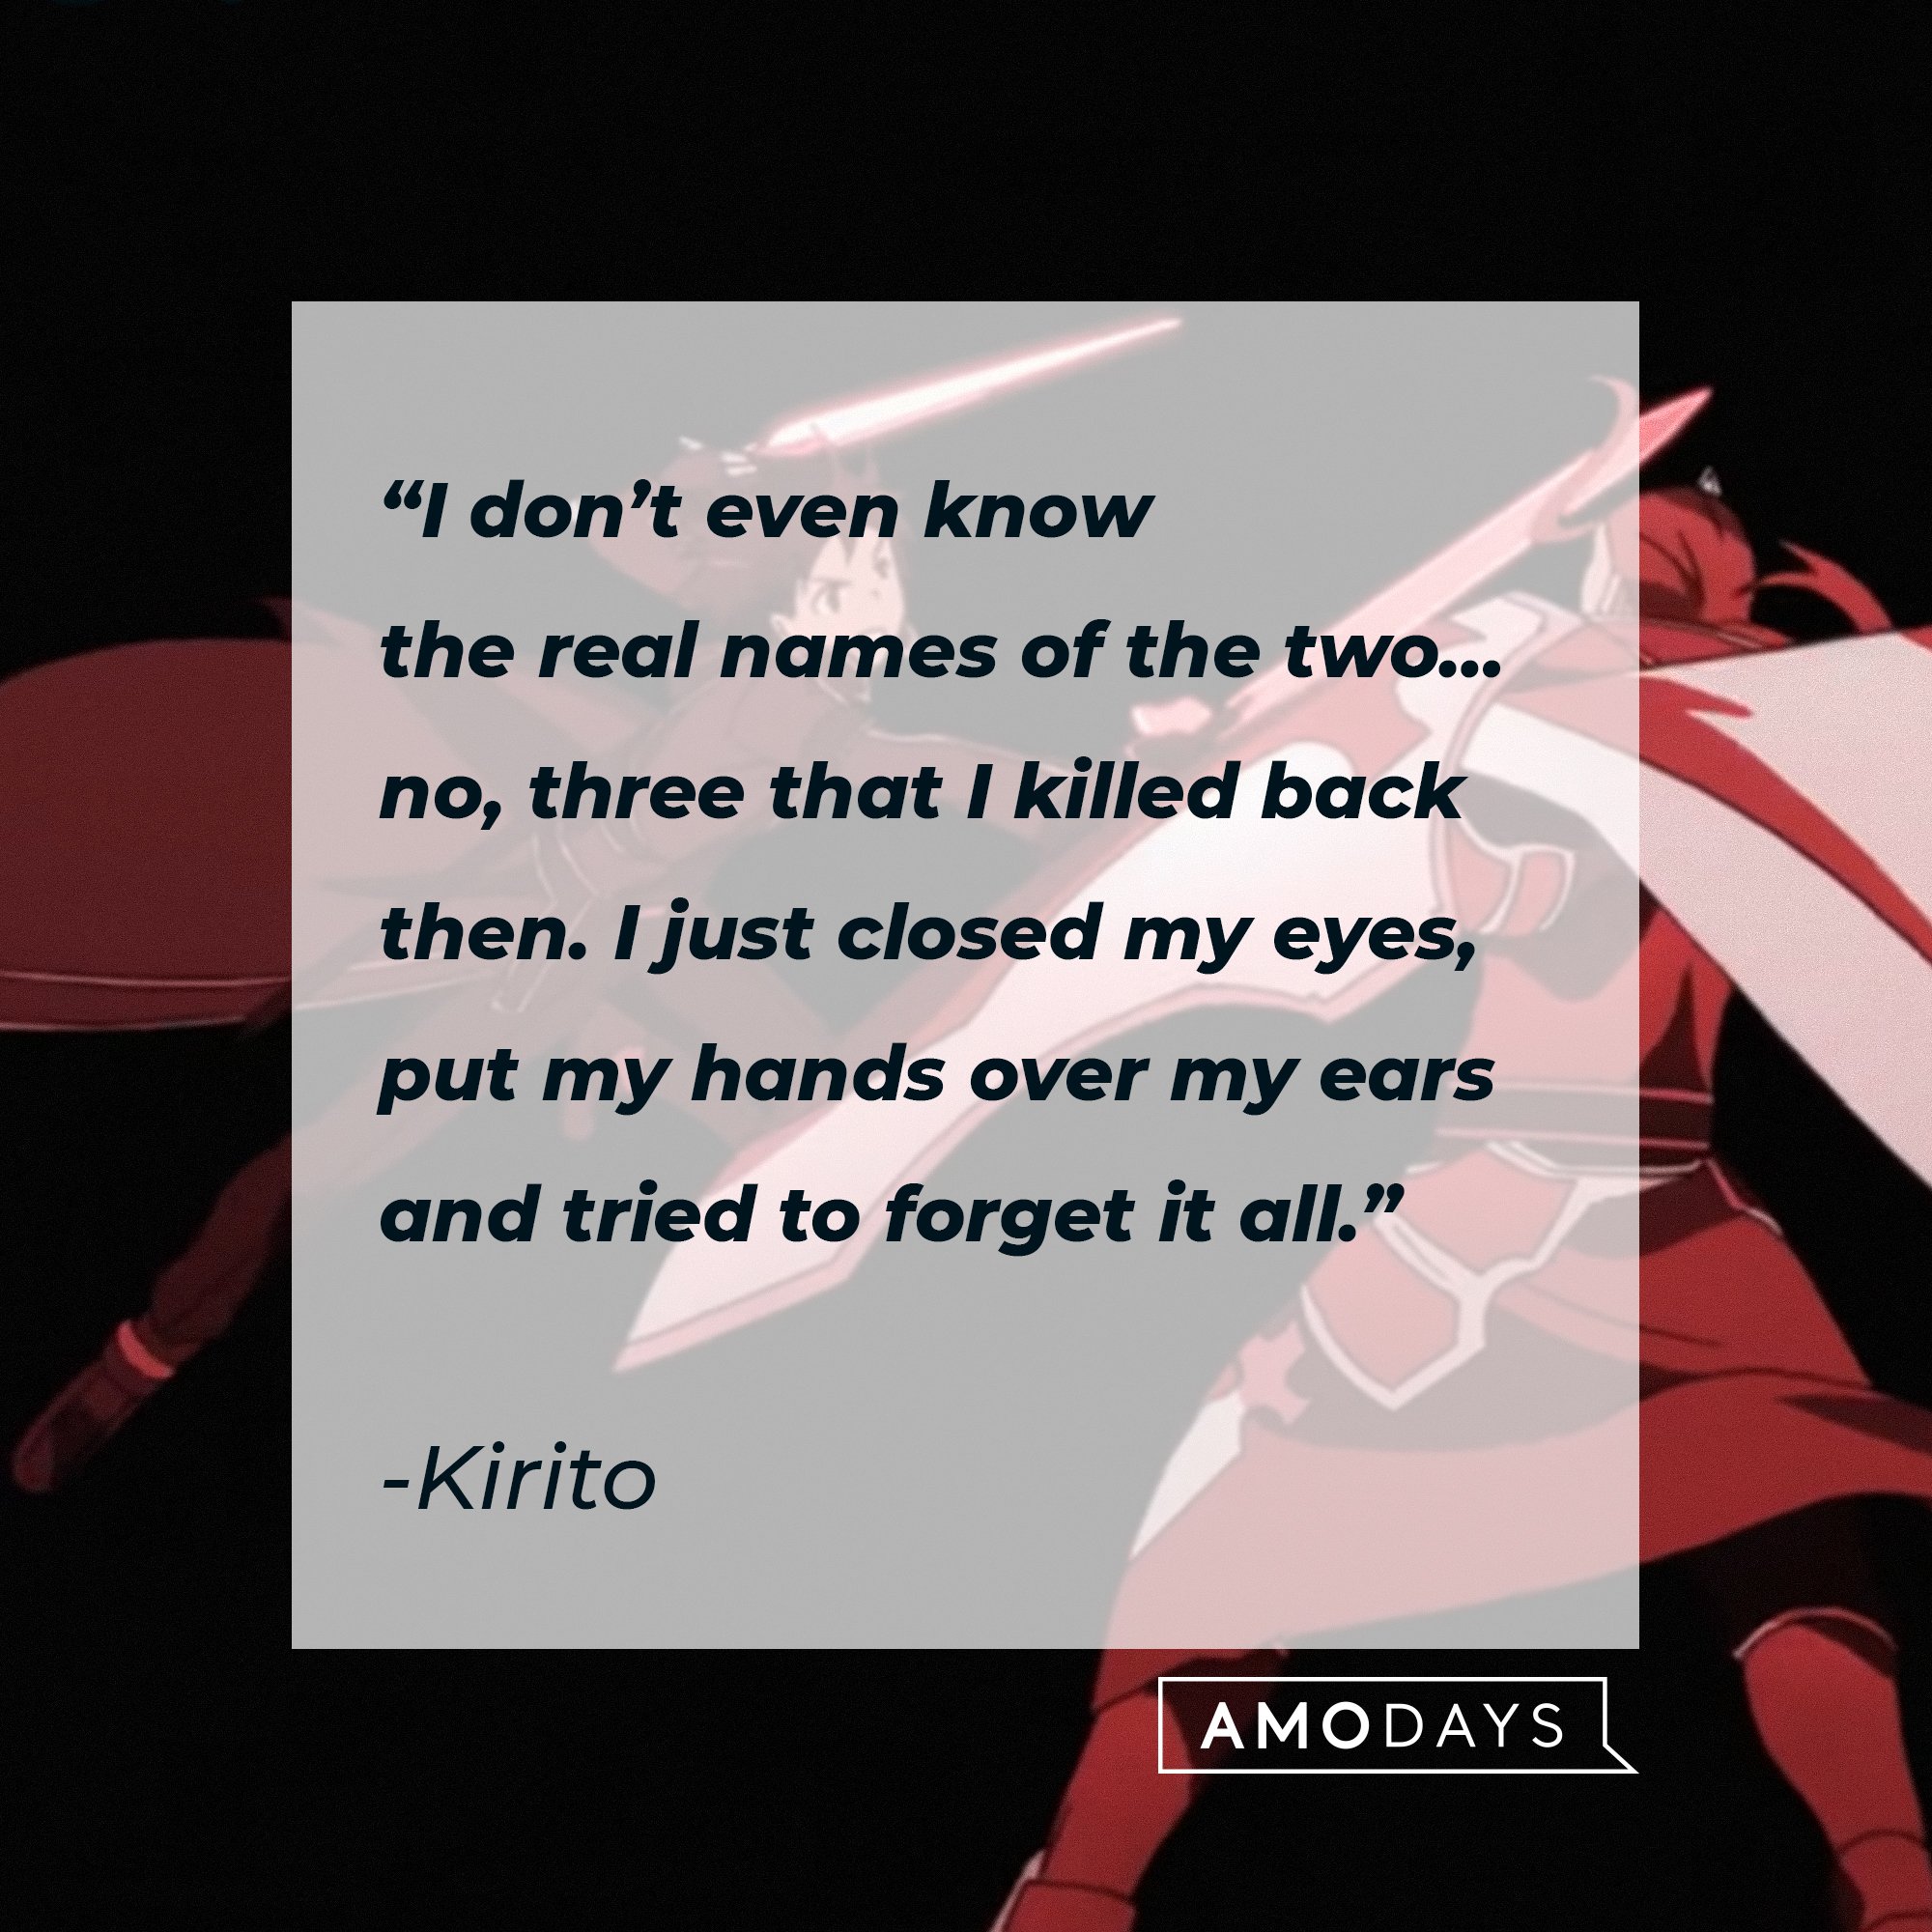 Kirito’s quote: “I don’t even know the real names of the two… no, three that I killed back then. I just closed my eyes, put my hands over my ears, and tried to forget it all.” | Image: AmoDays